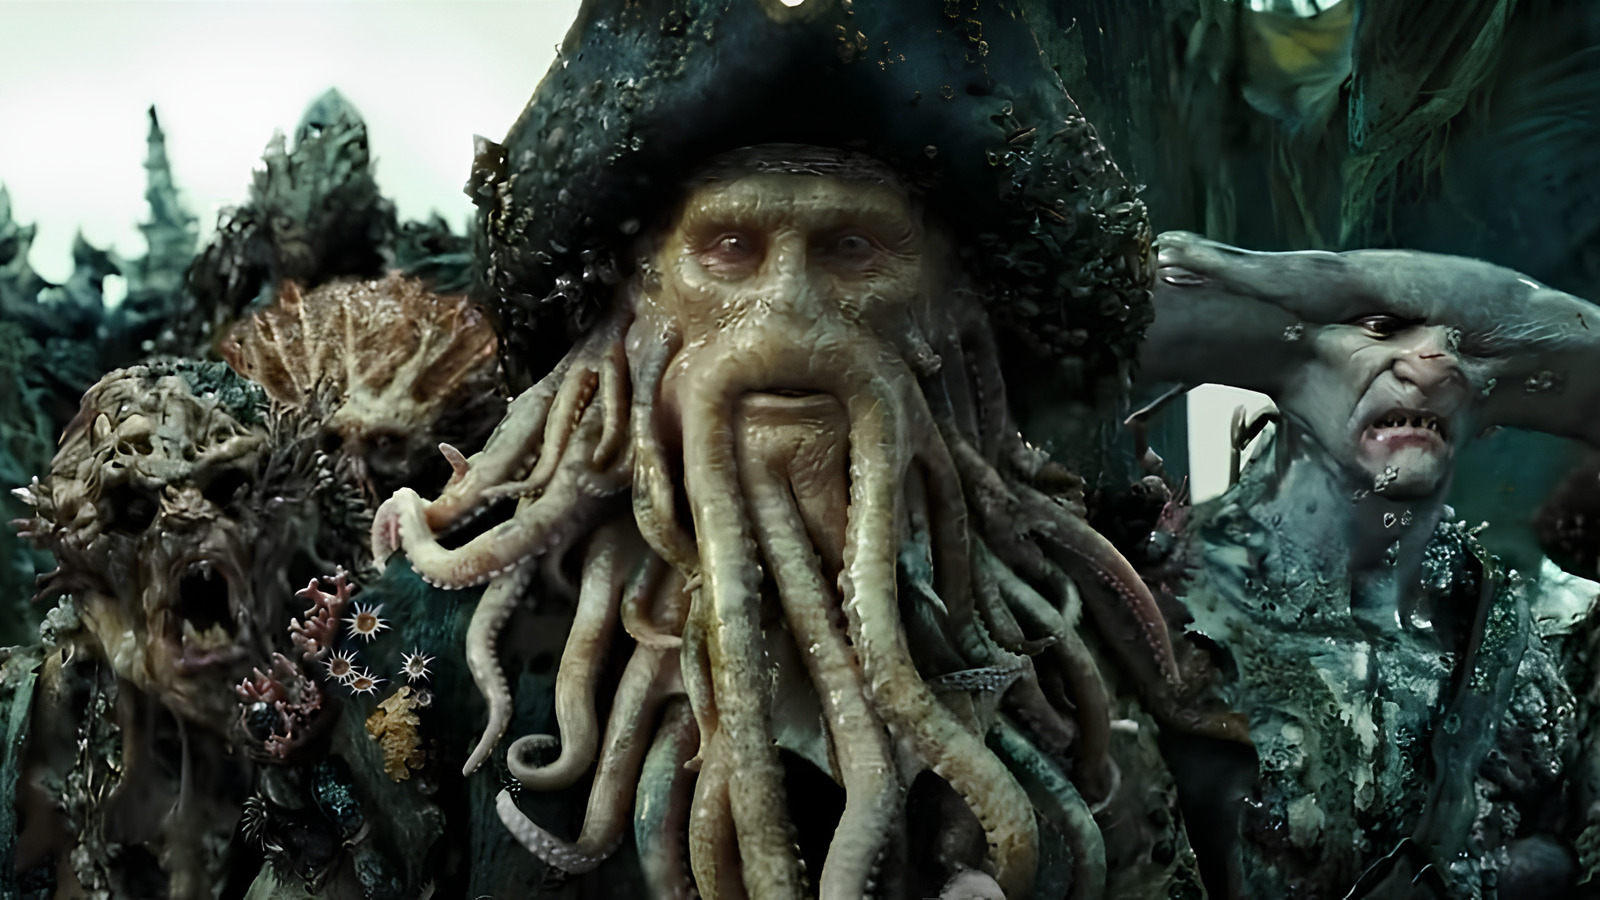 Pirates Of The Caribbean Who Plays Davy Jones & What Does He Look Like